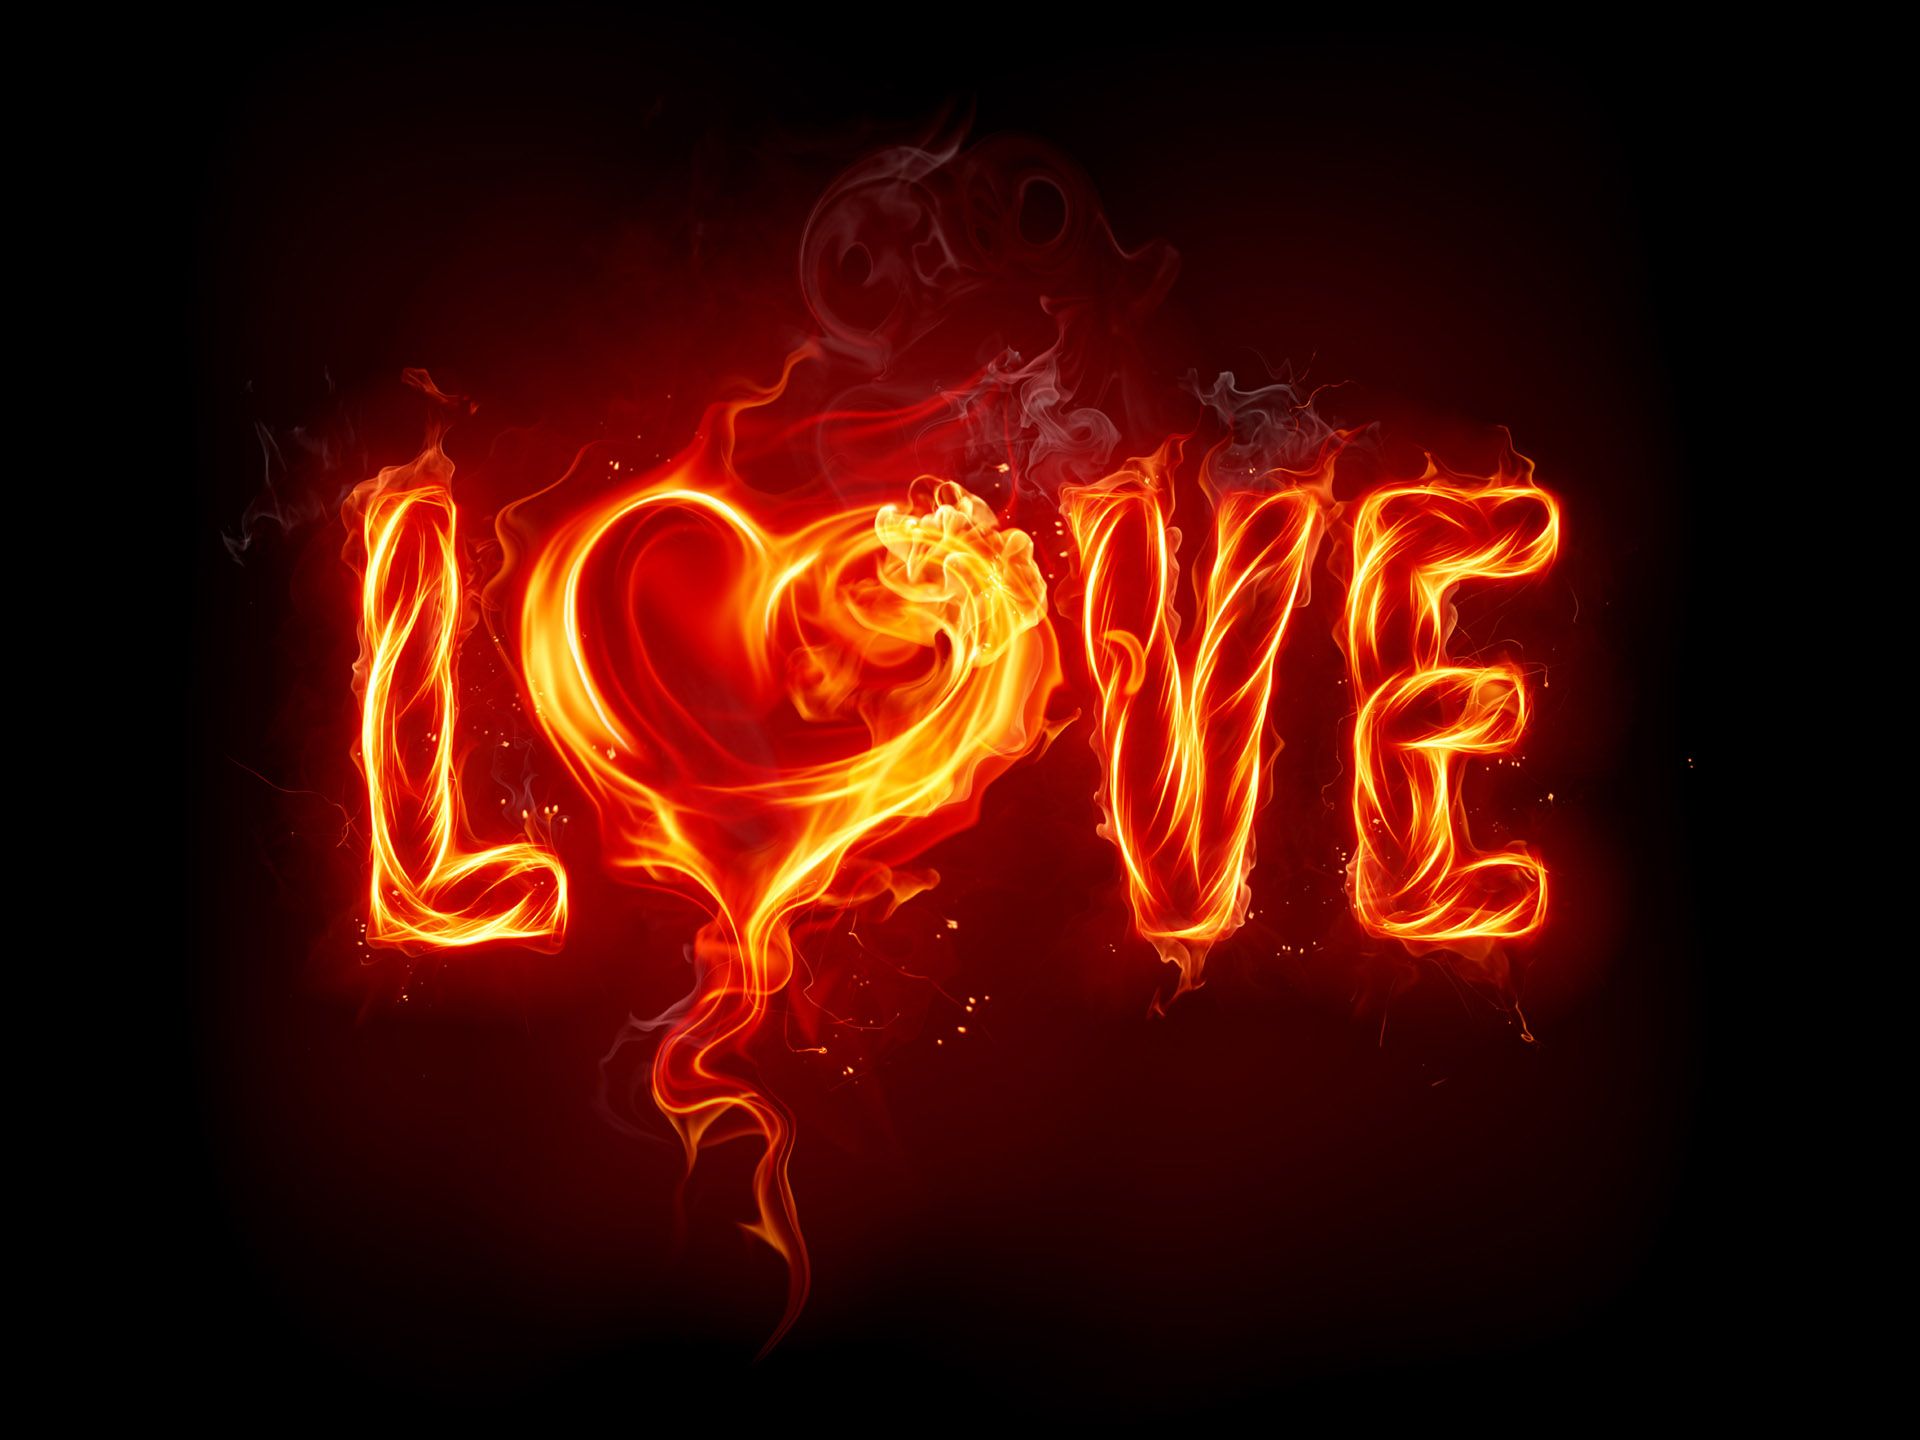 689 Love HD Wallpapers Backgrounds - Wallpaper Abyss